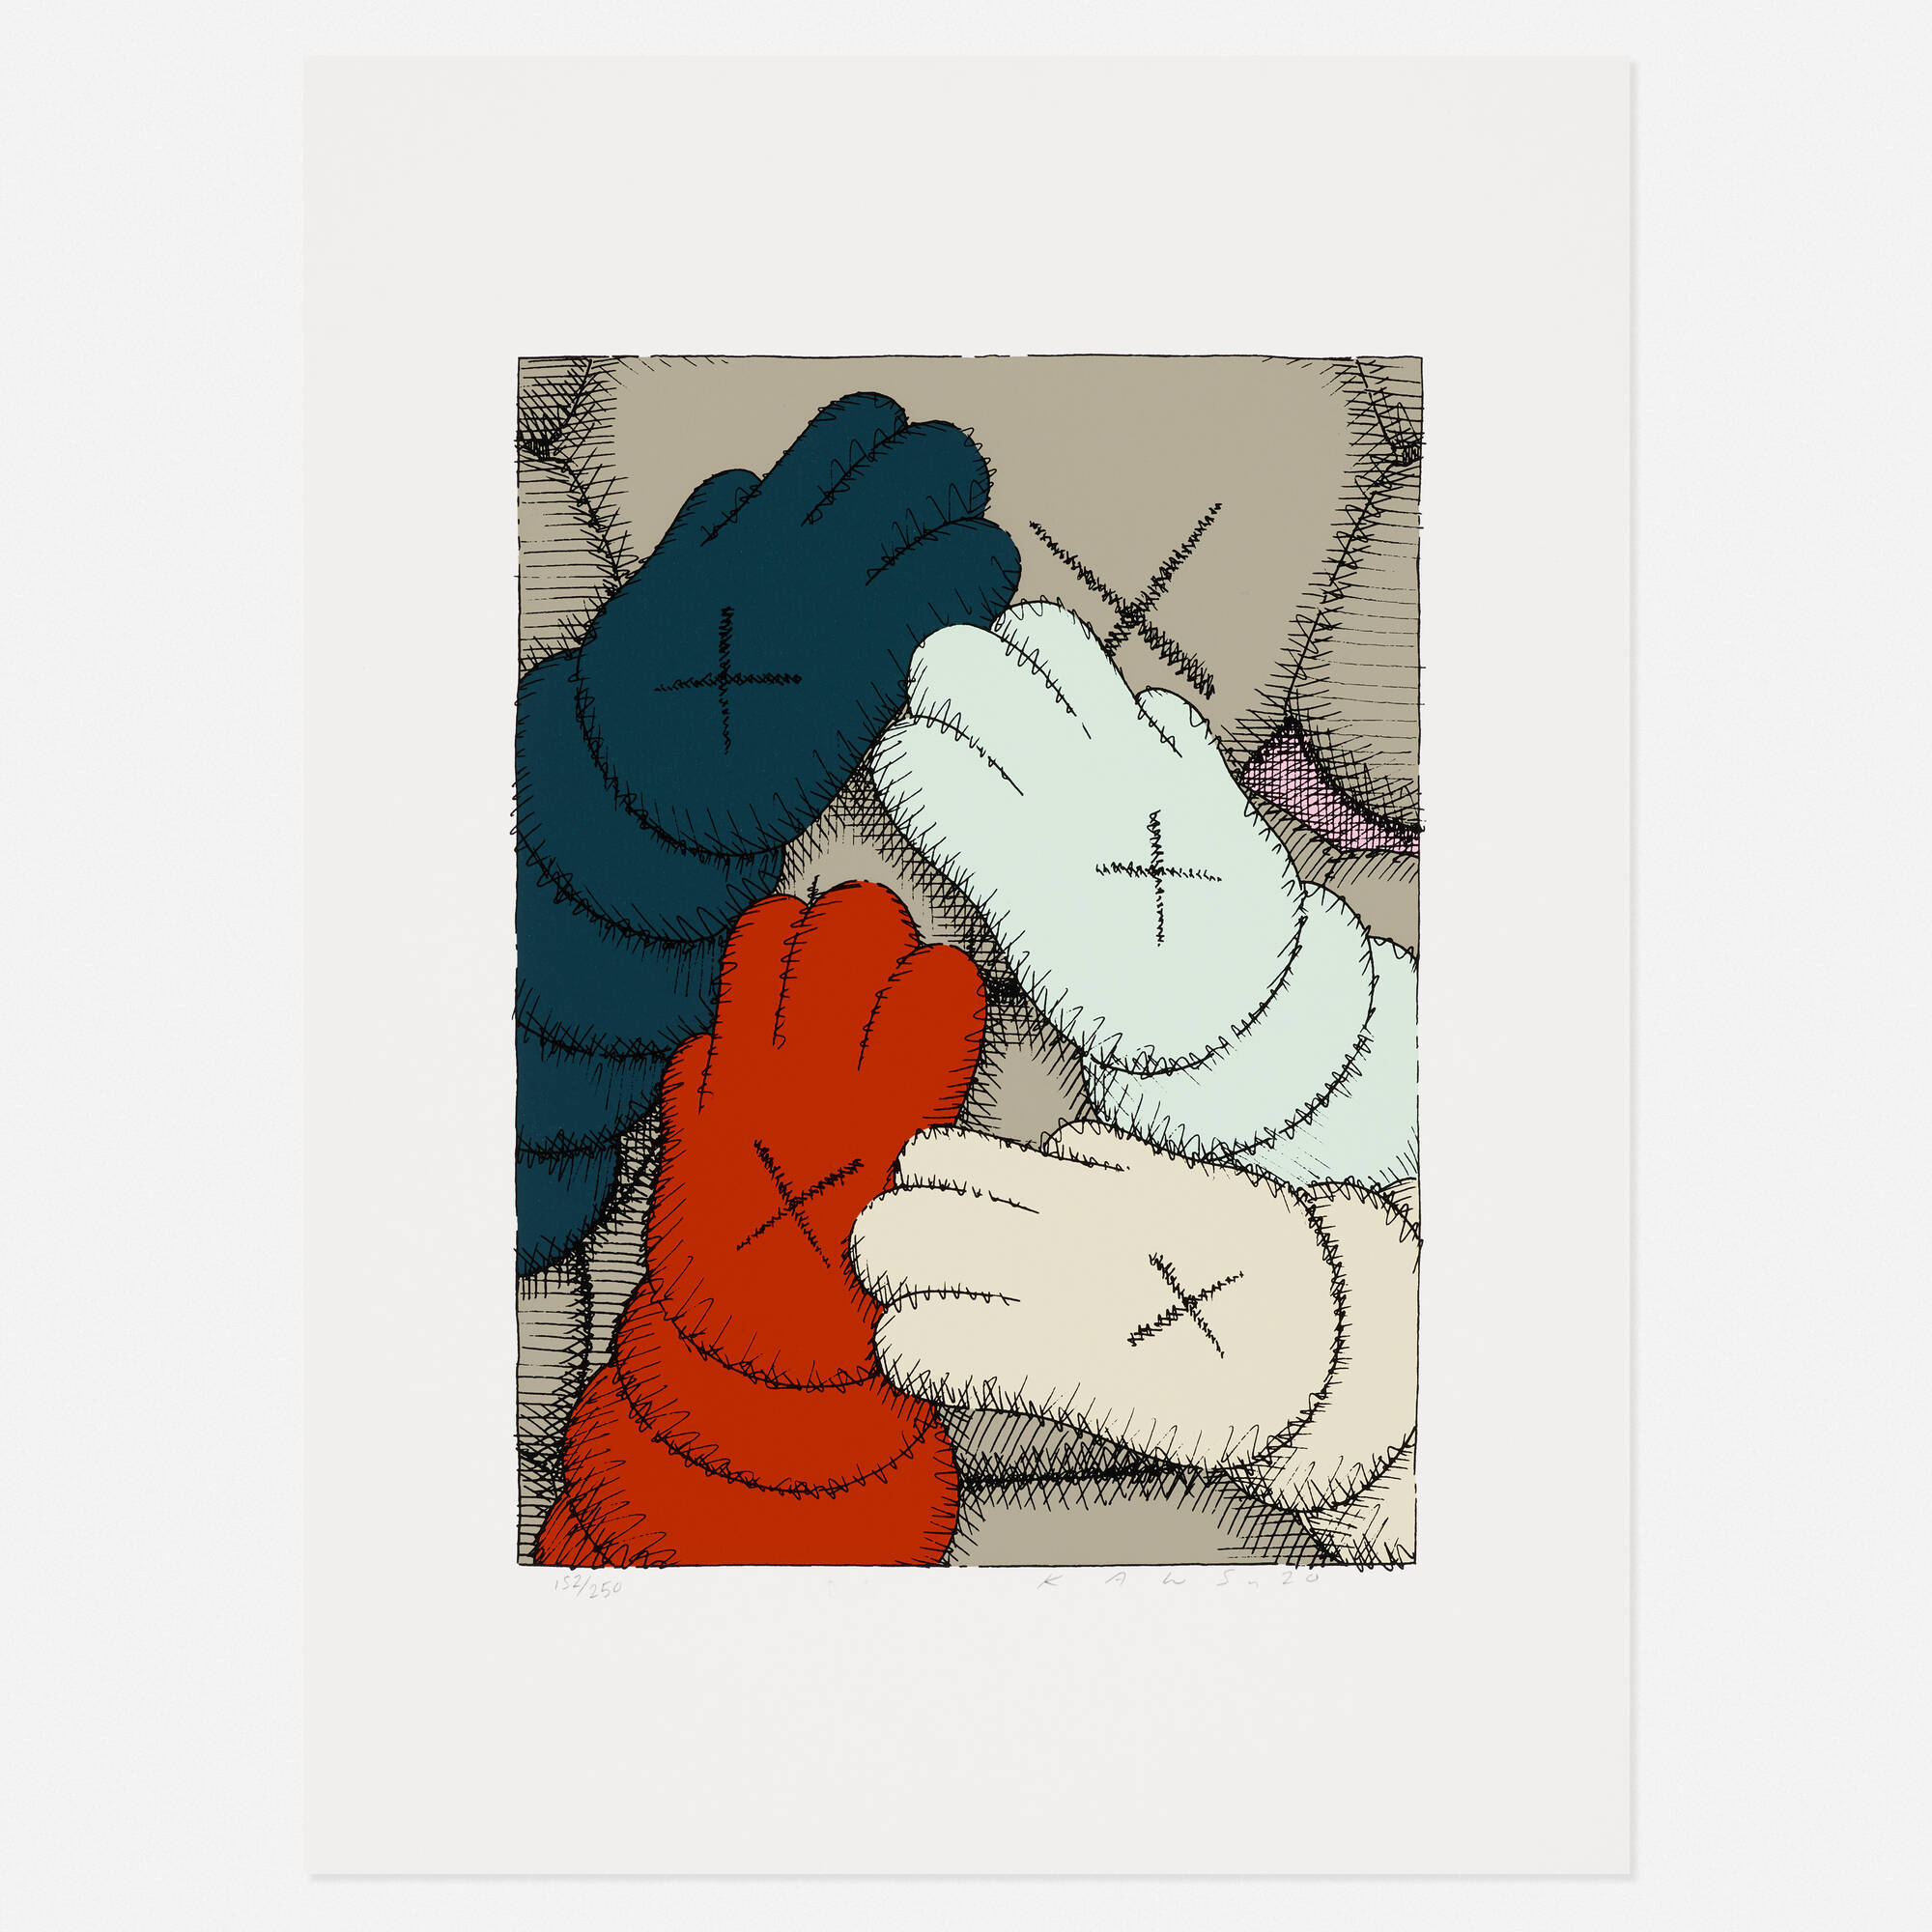 141: KAWS (BRIAN DONNELLY), Untitled (from the Urge portfolio 